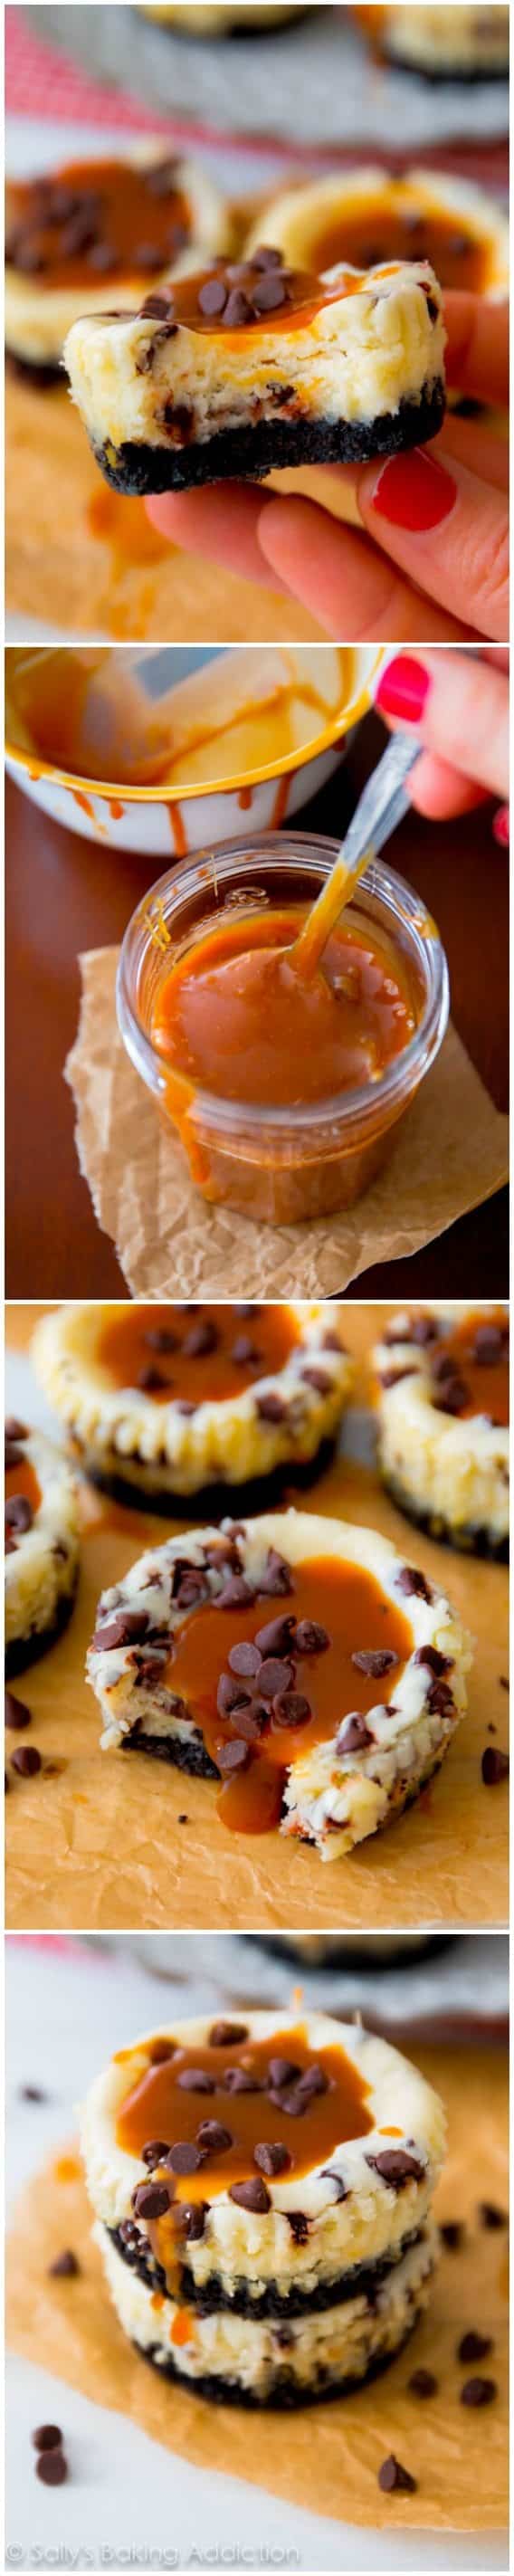 4 images of mini salted caramel chocolate chip cheesecakes